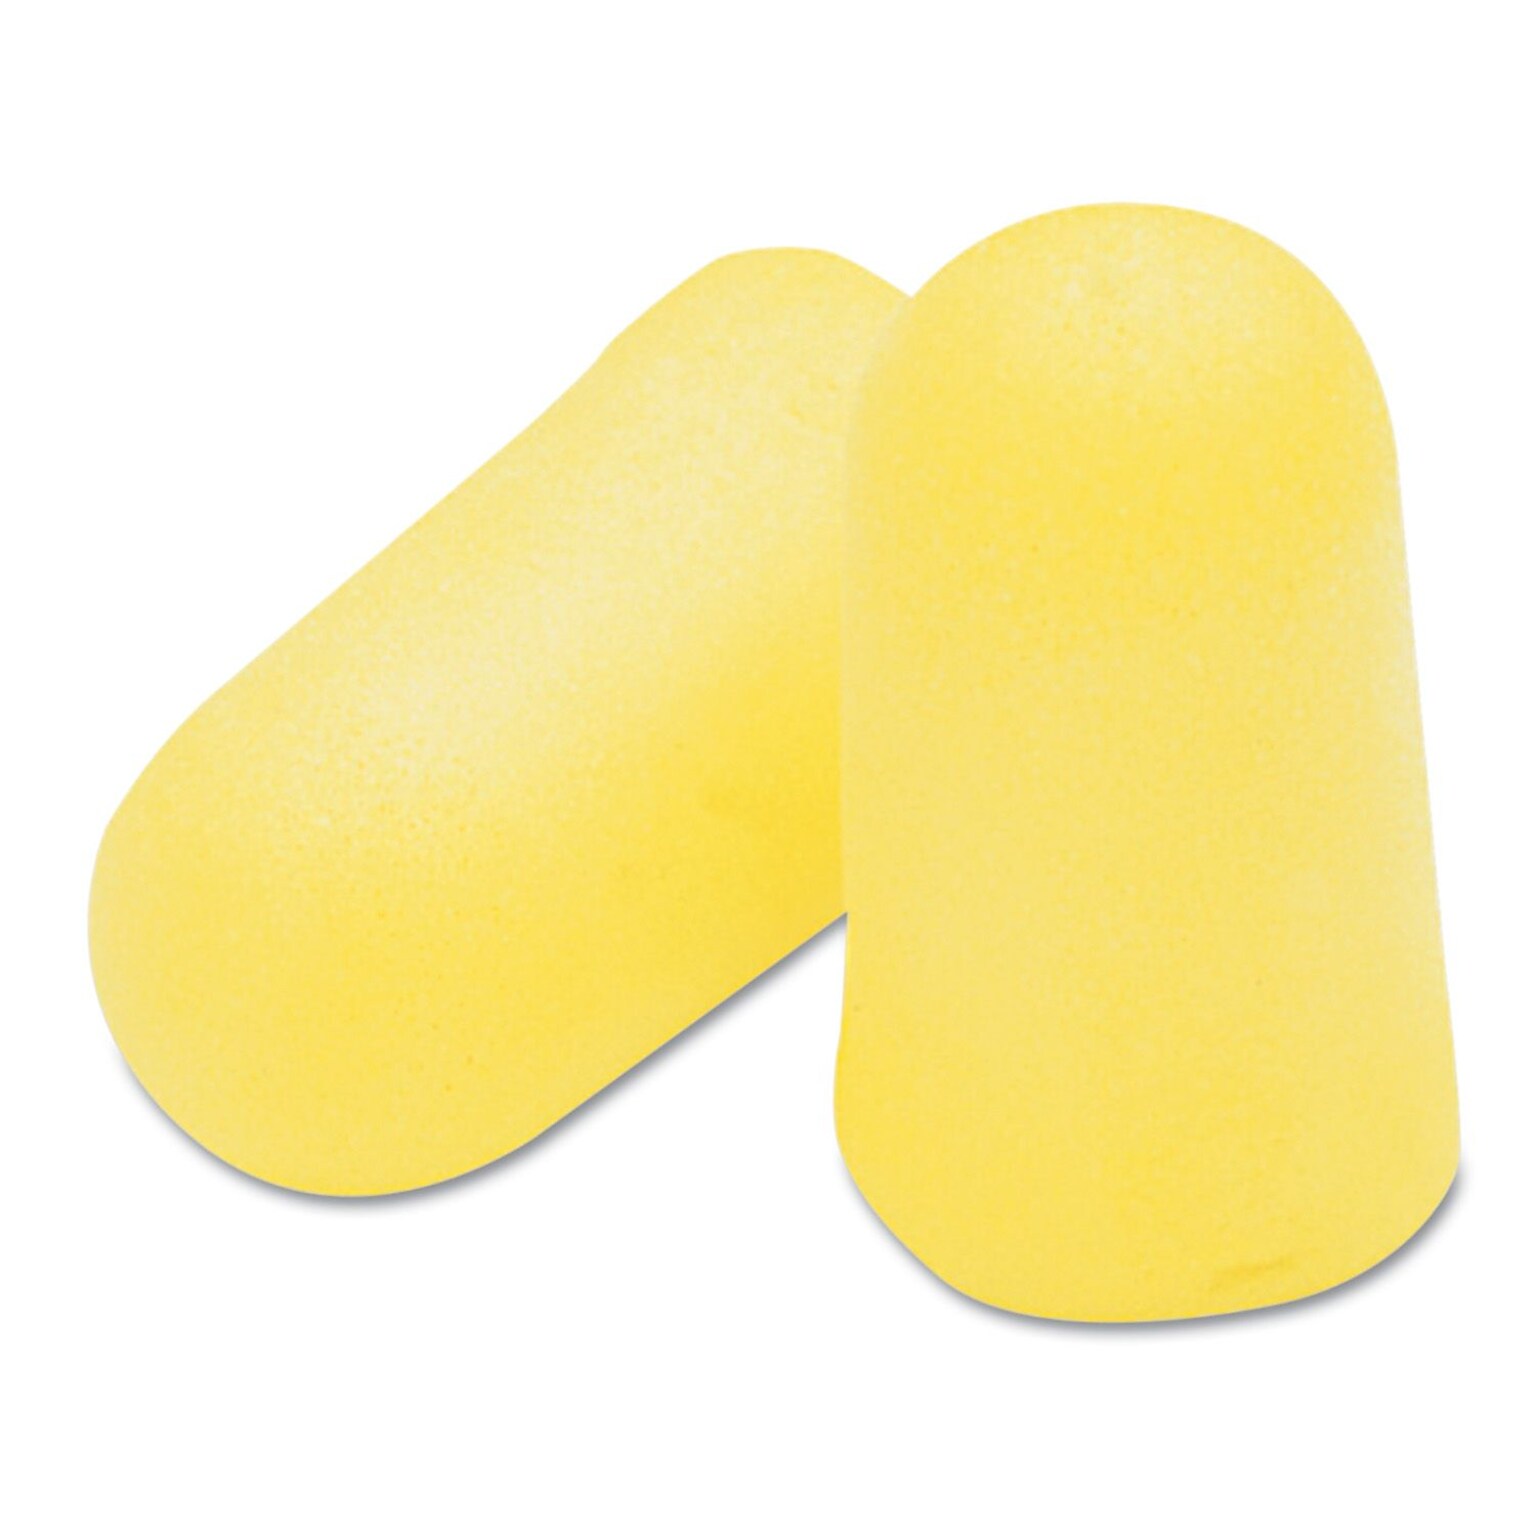 3M™ E-A-R™ TaperFit™ 2 Earplugs, Uncorded, Poly Bag, Regular Size, 200 Pairs/Case (312-1219)